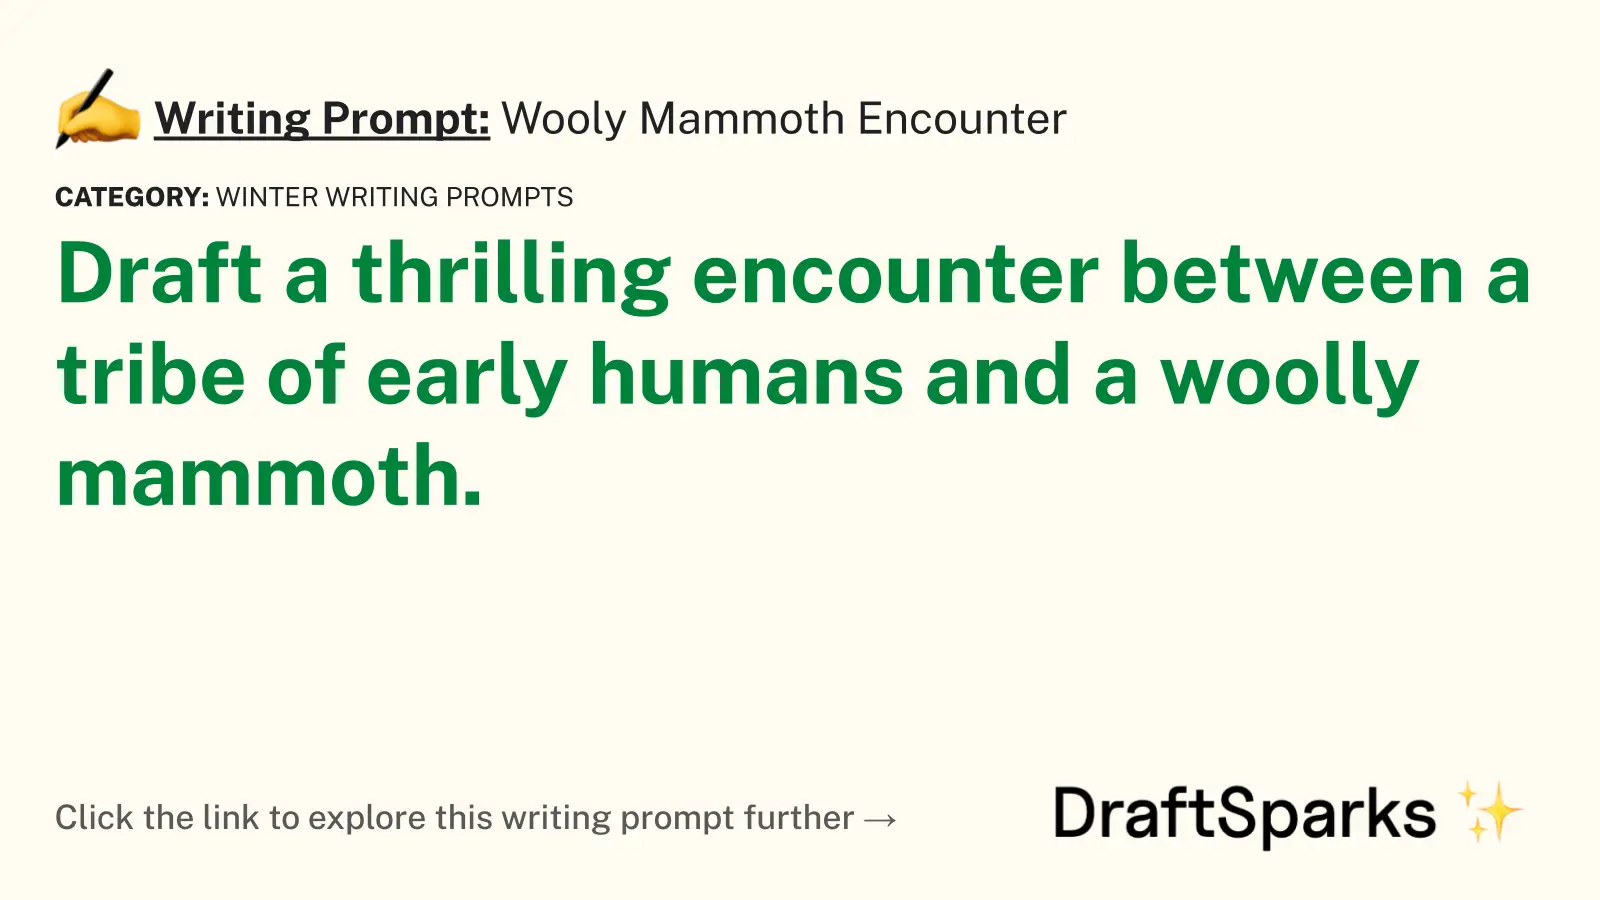 Wooly Mammoth Encounter